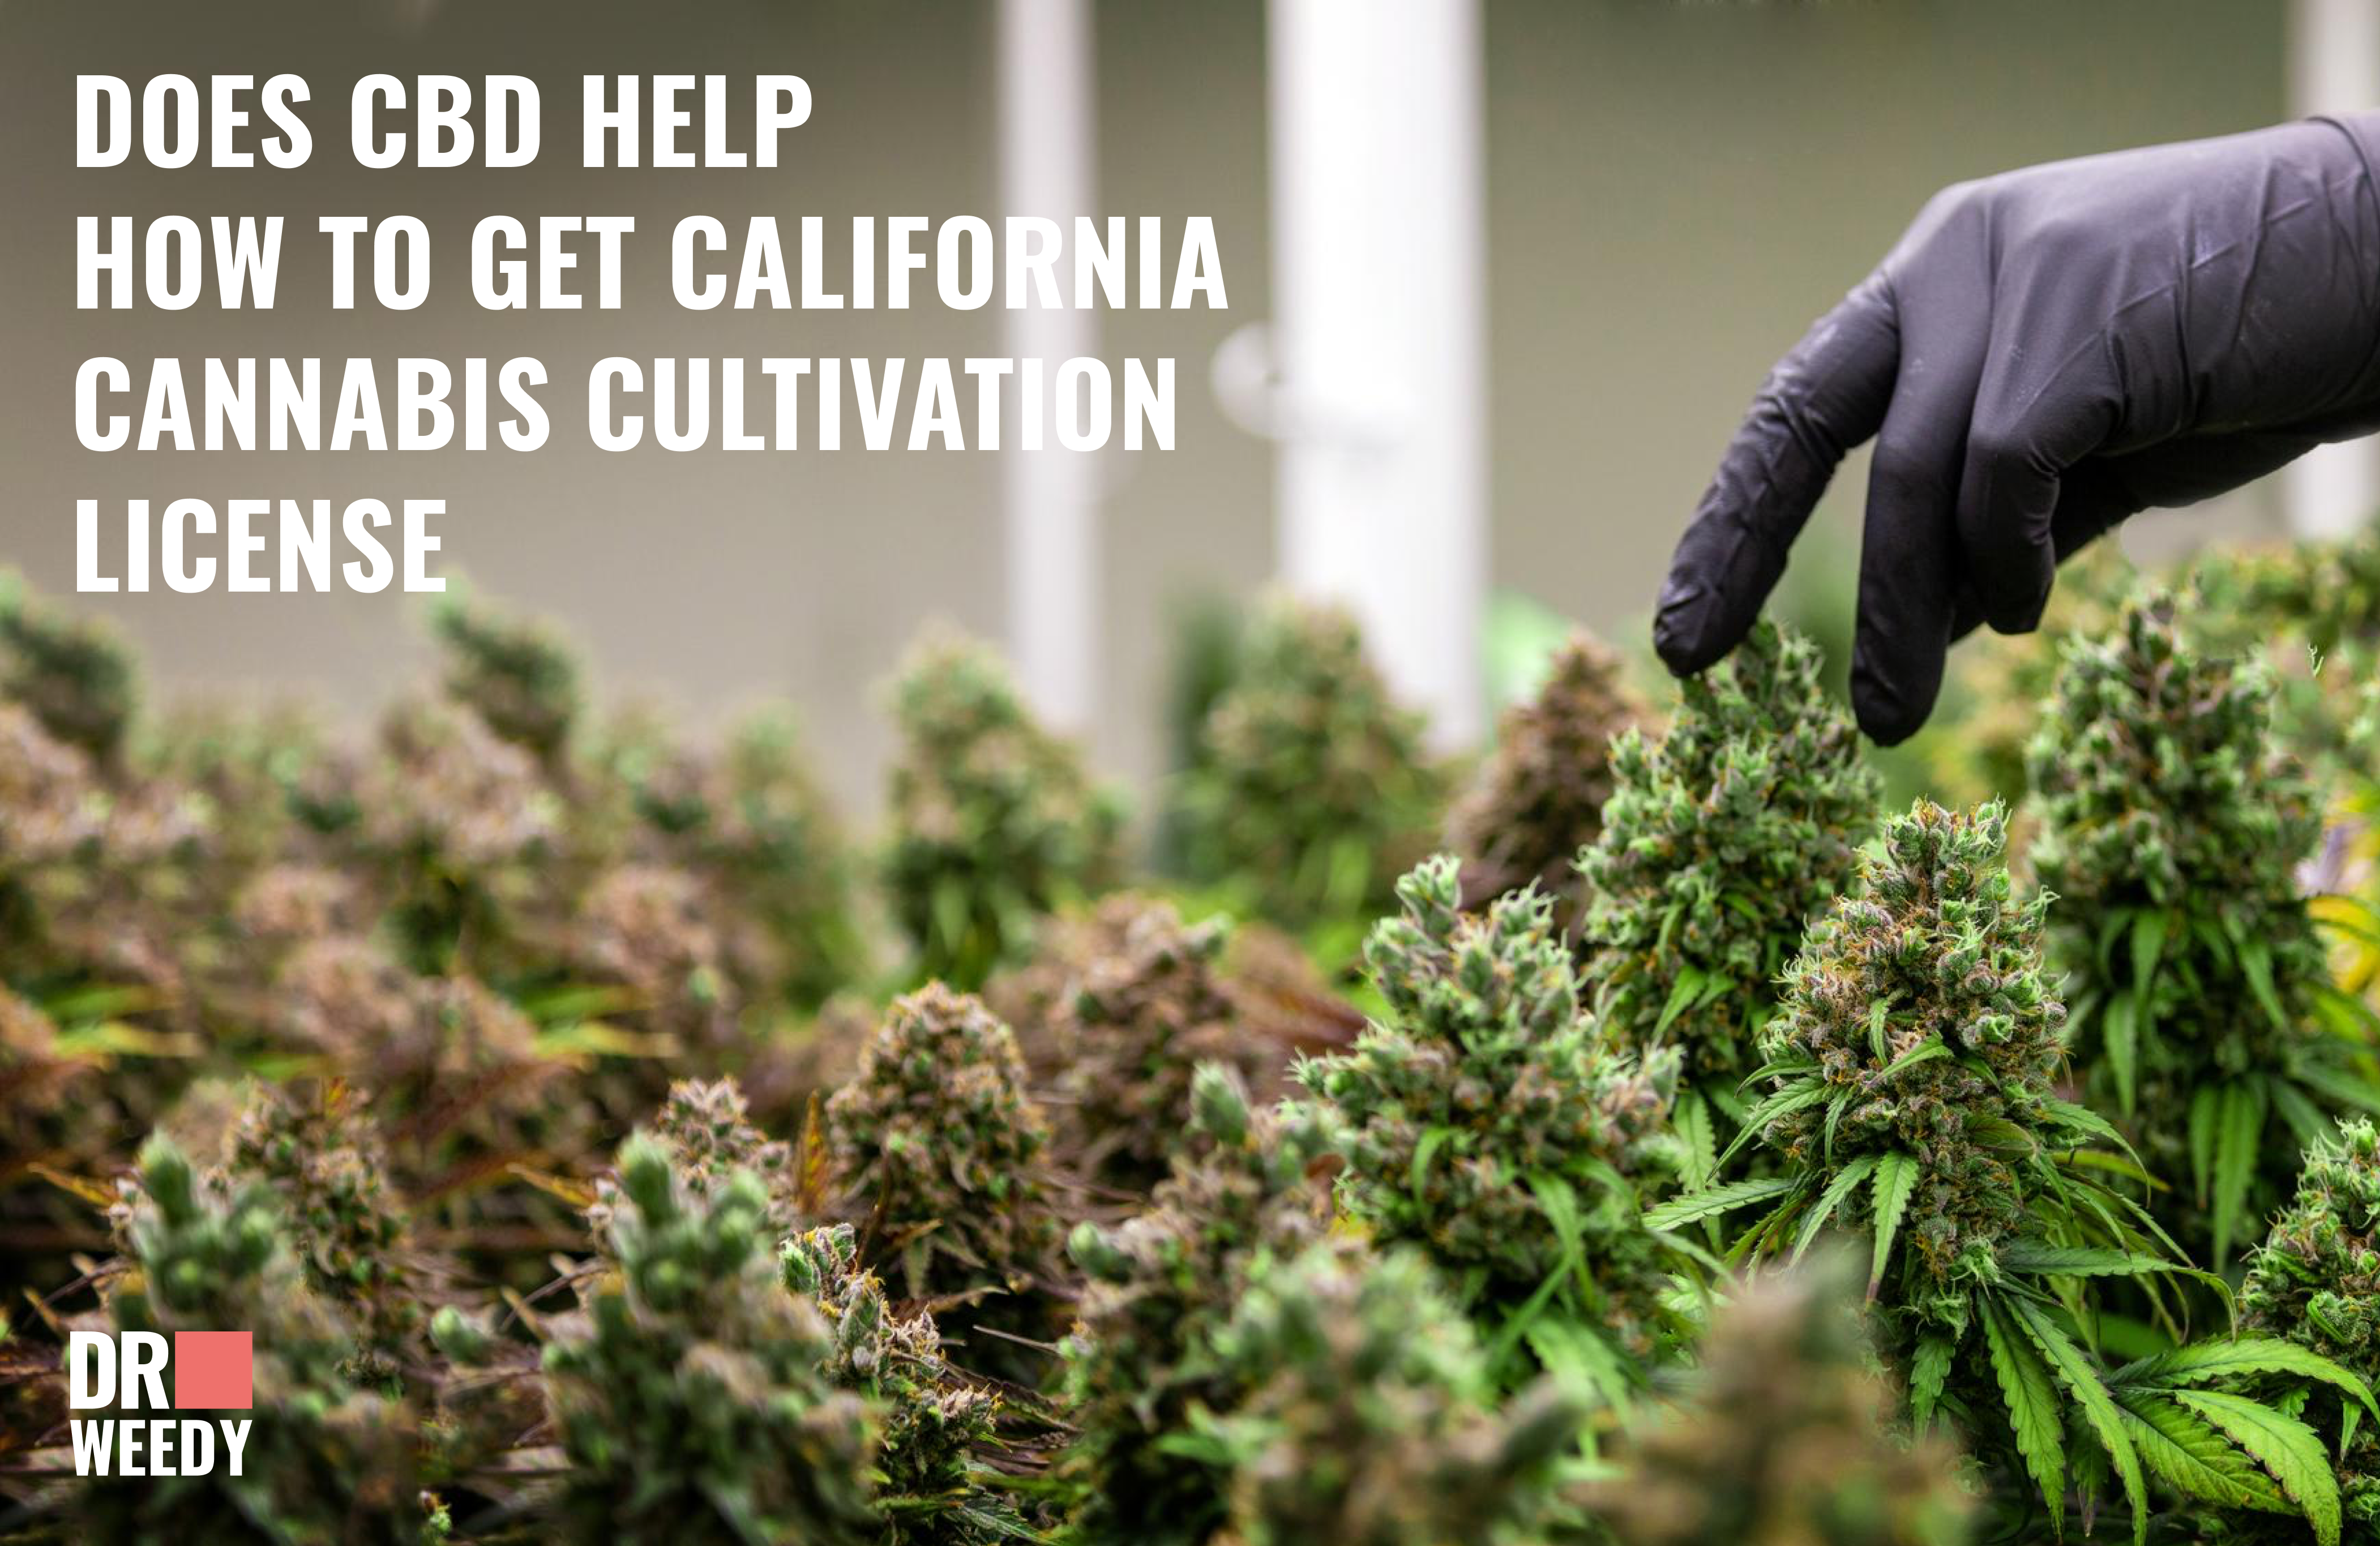 How to Get California Cannabis Cultivation License